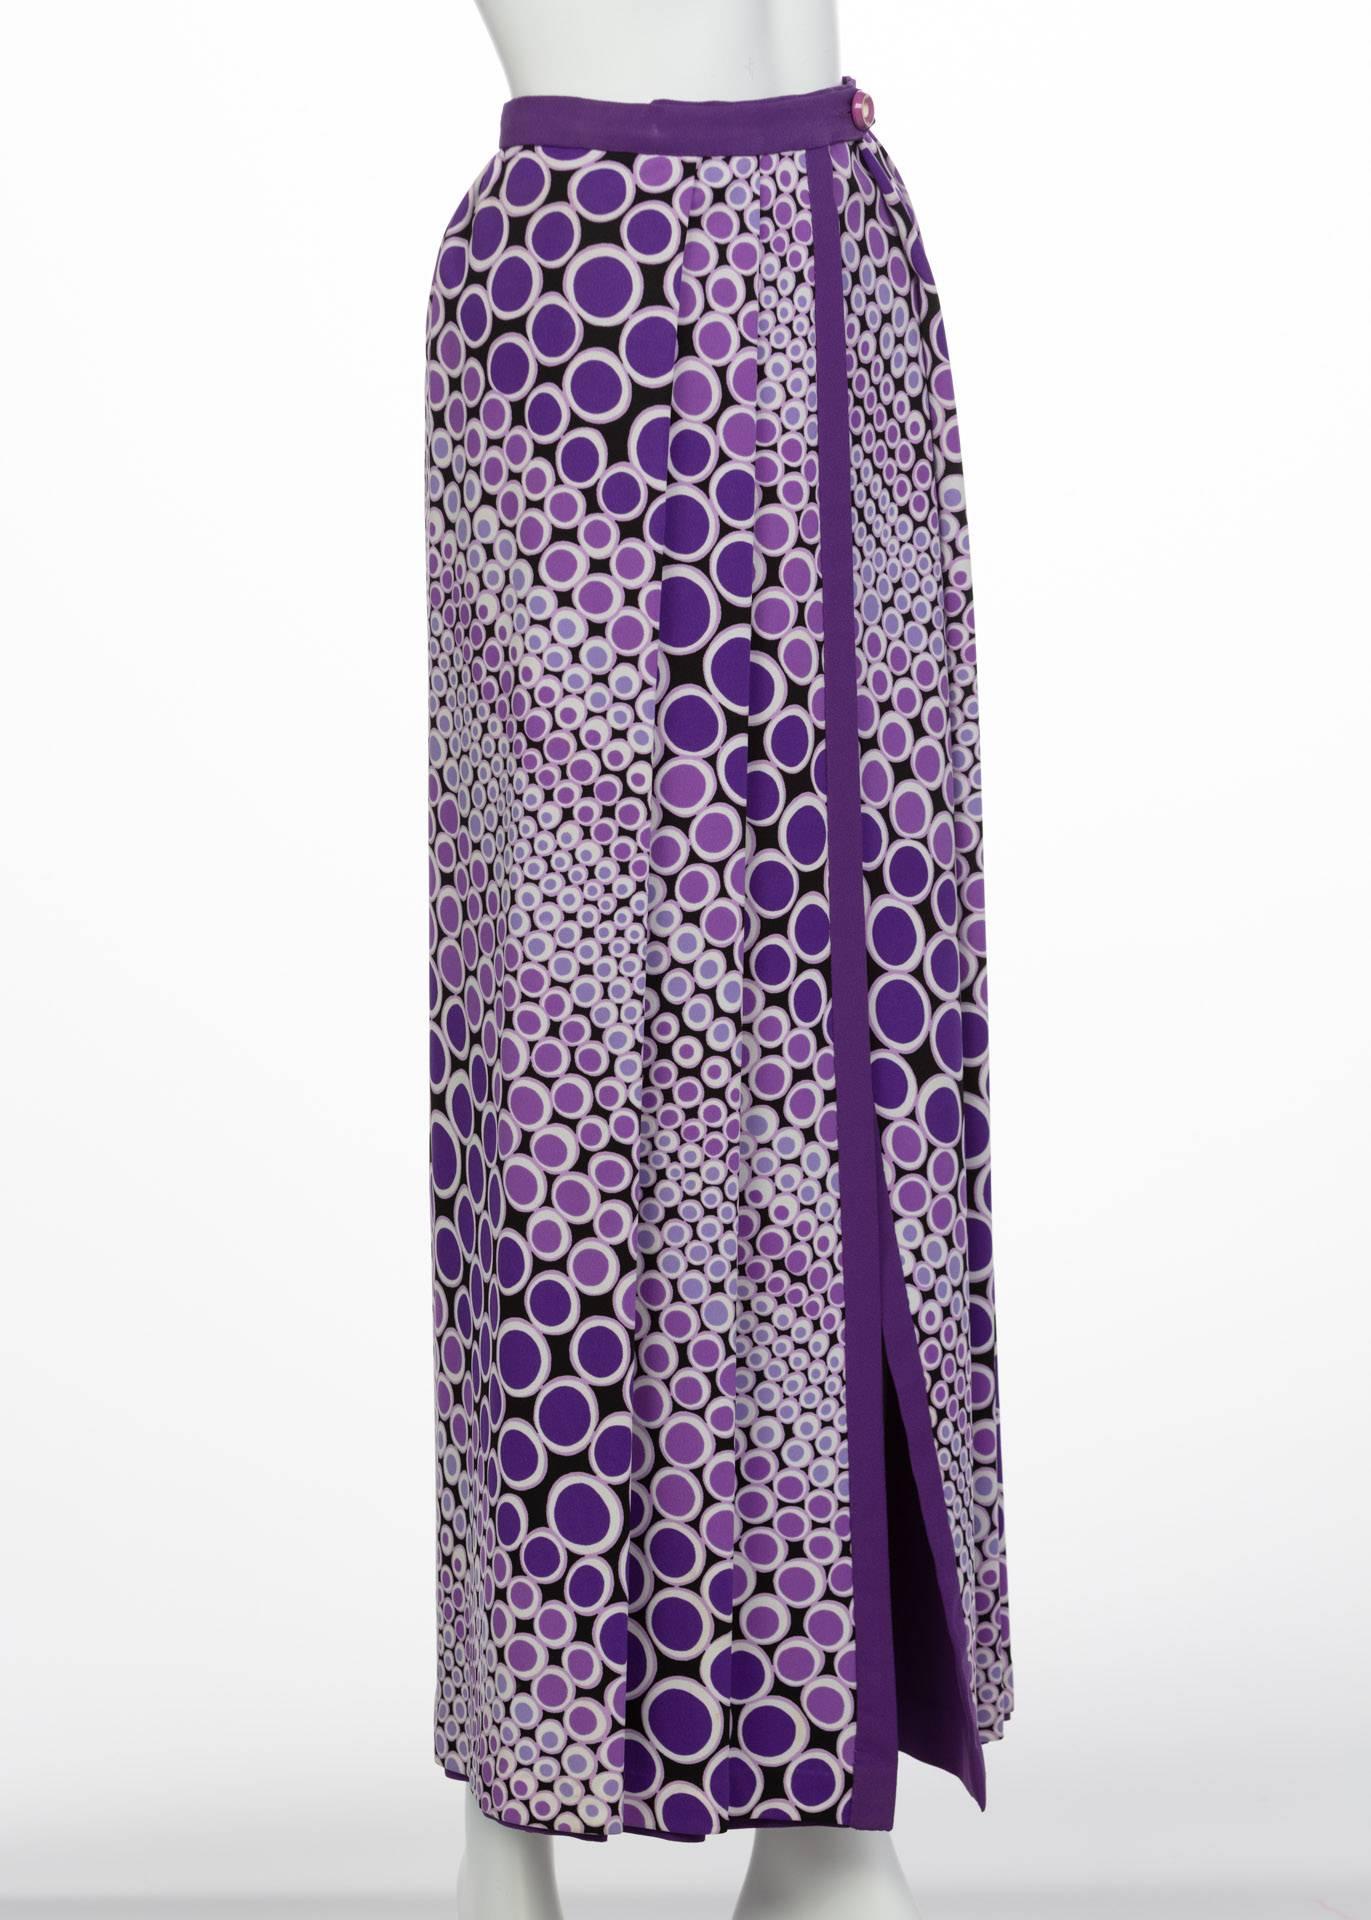 Women's Mod Purple and White Polka Dot Maxi Wrap Skirt, 1970s  For Sale